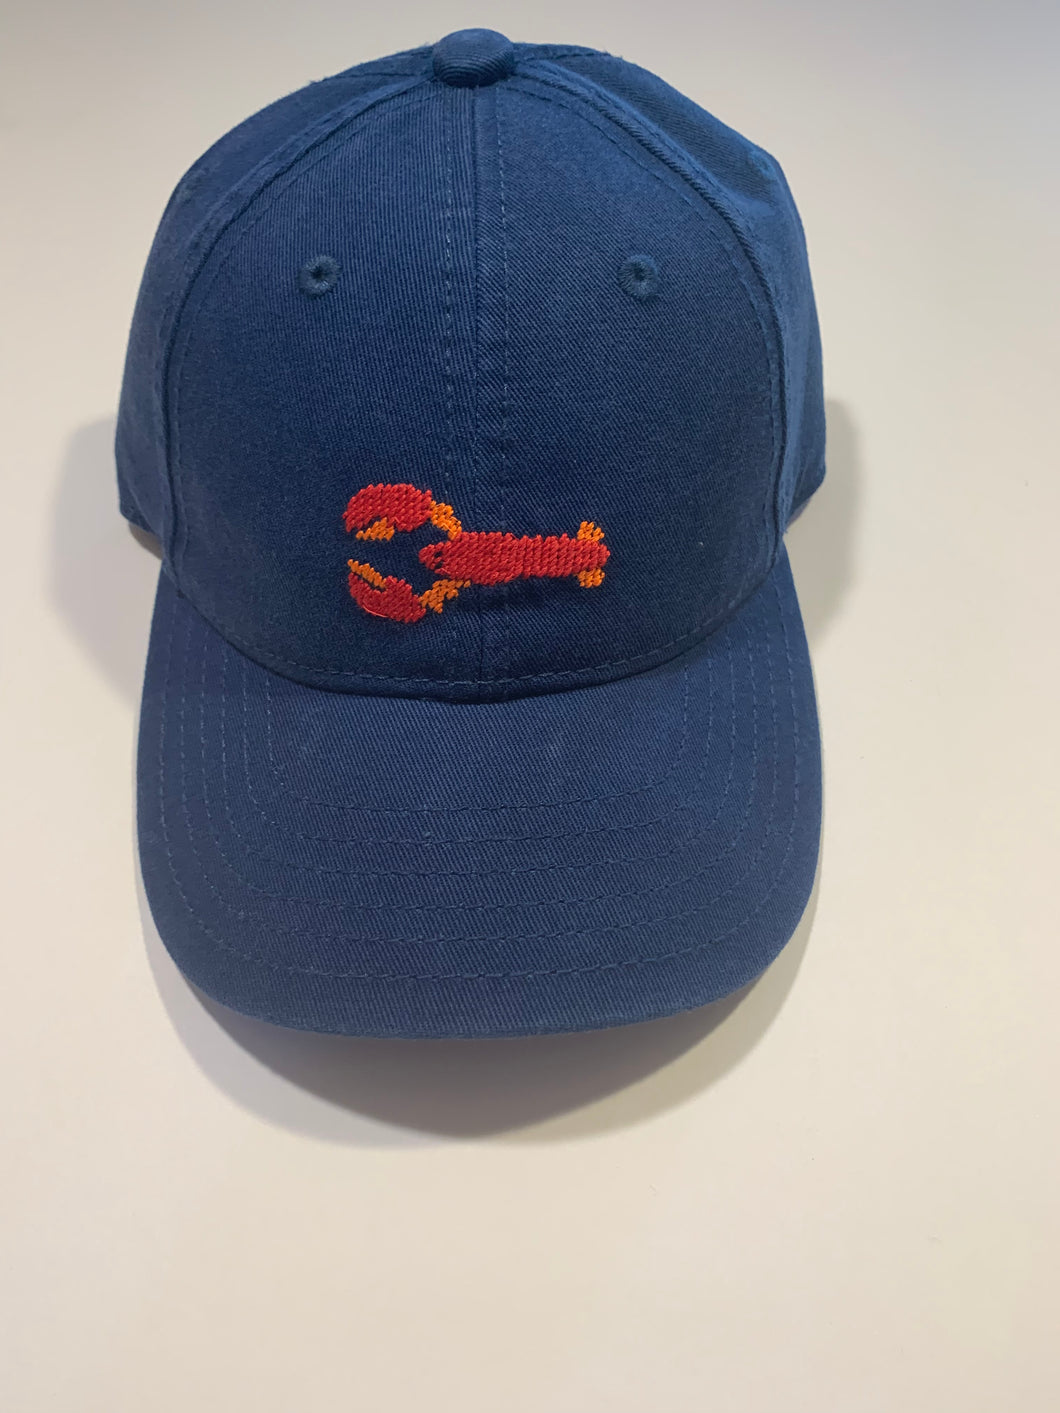 Blue lobster hat with Nantucket